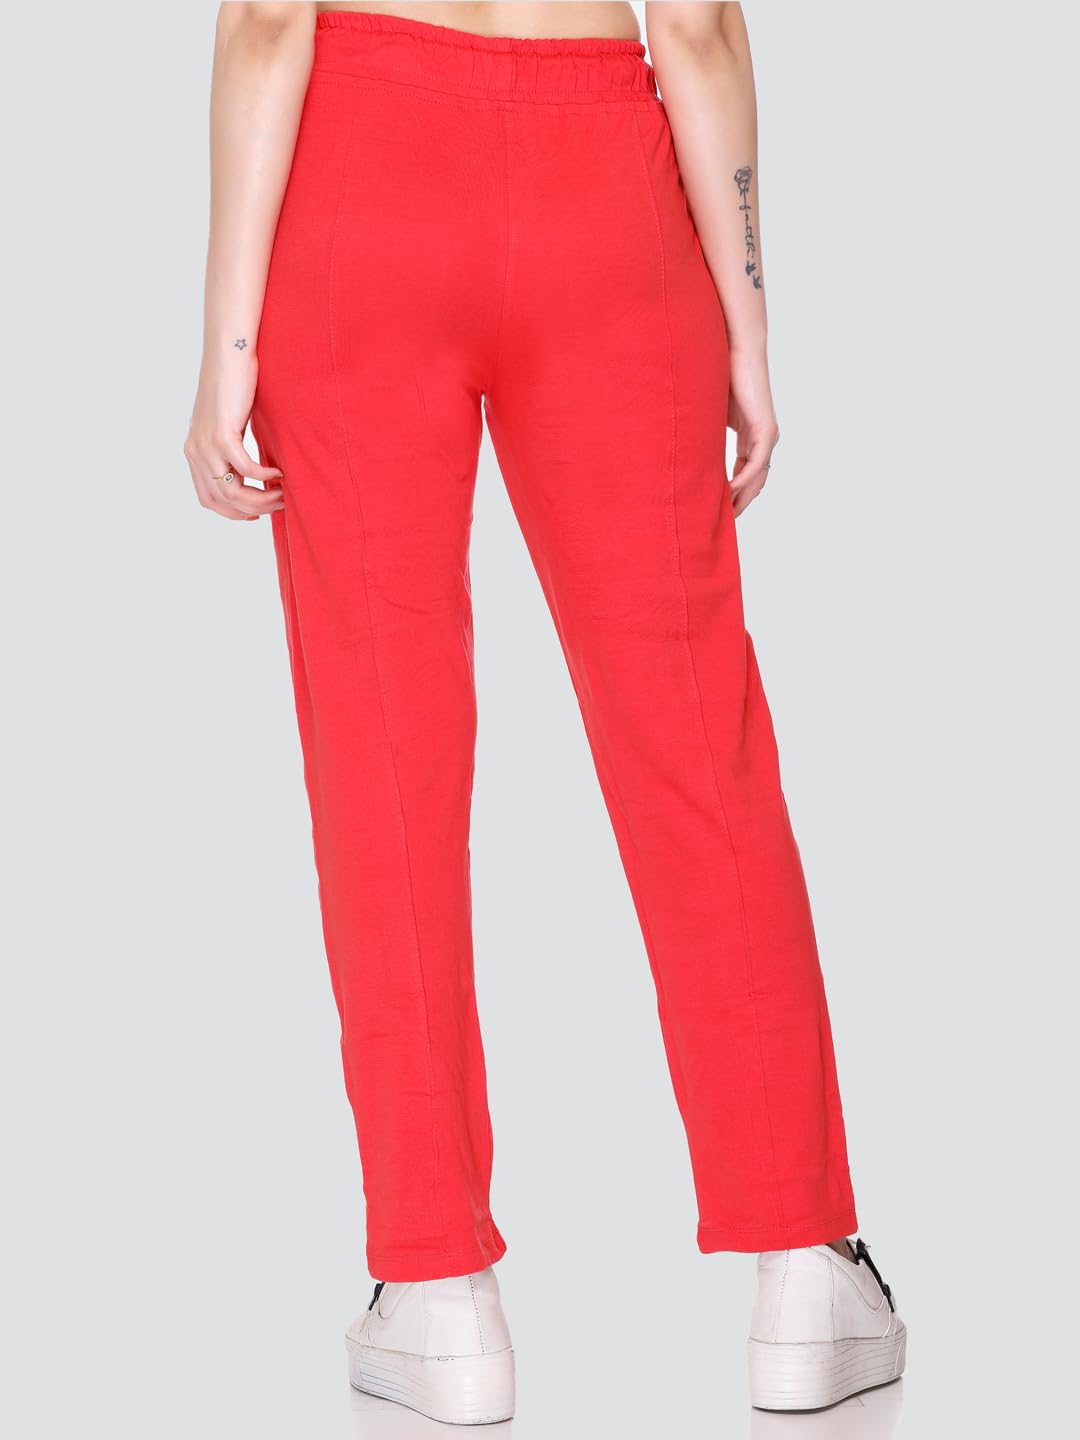 Cotton Red Loungepants For Women